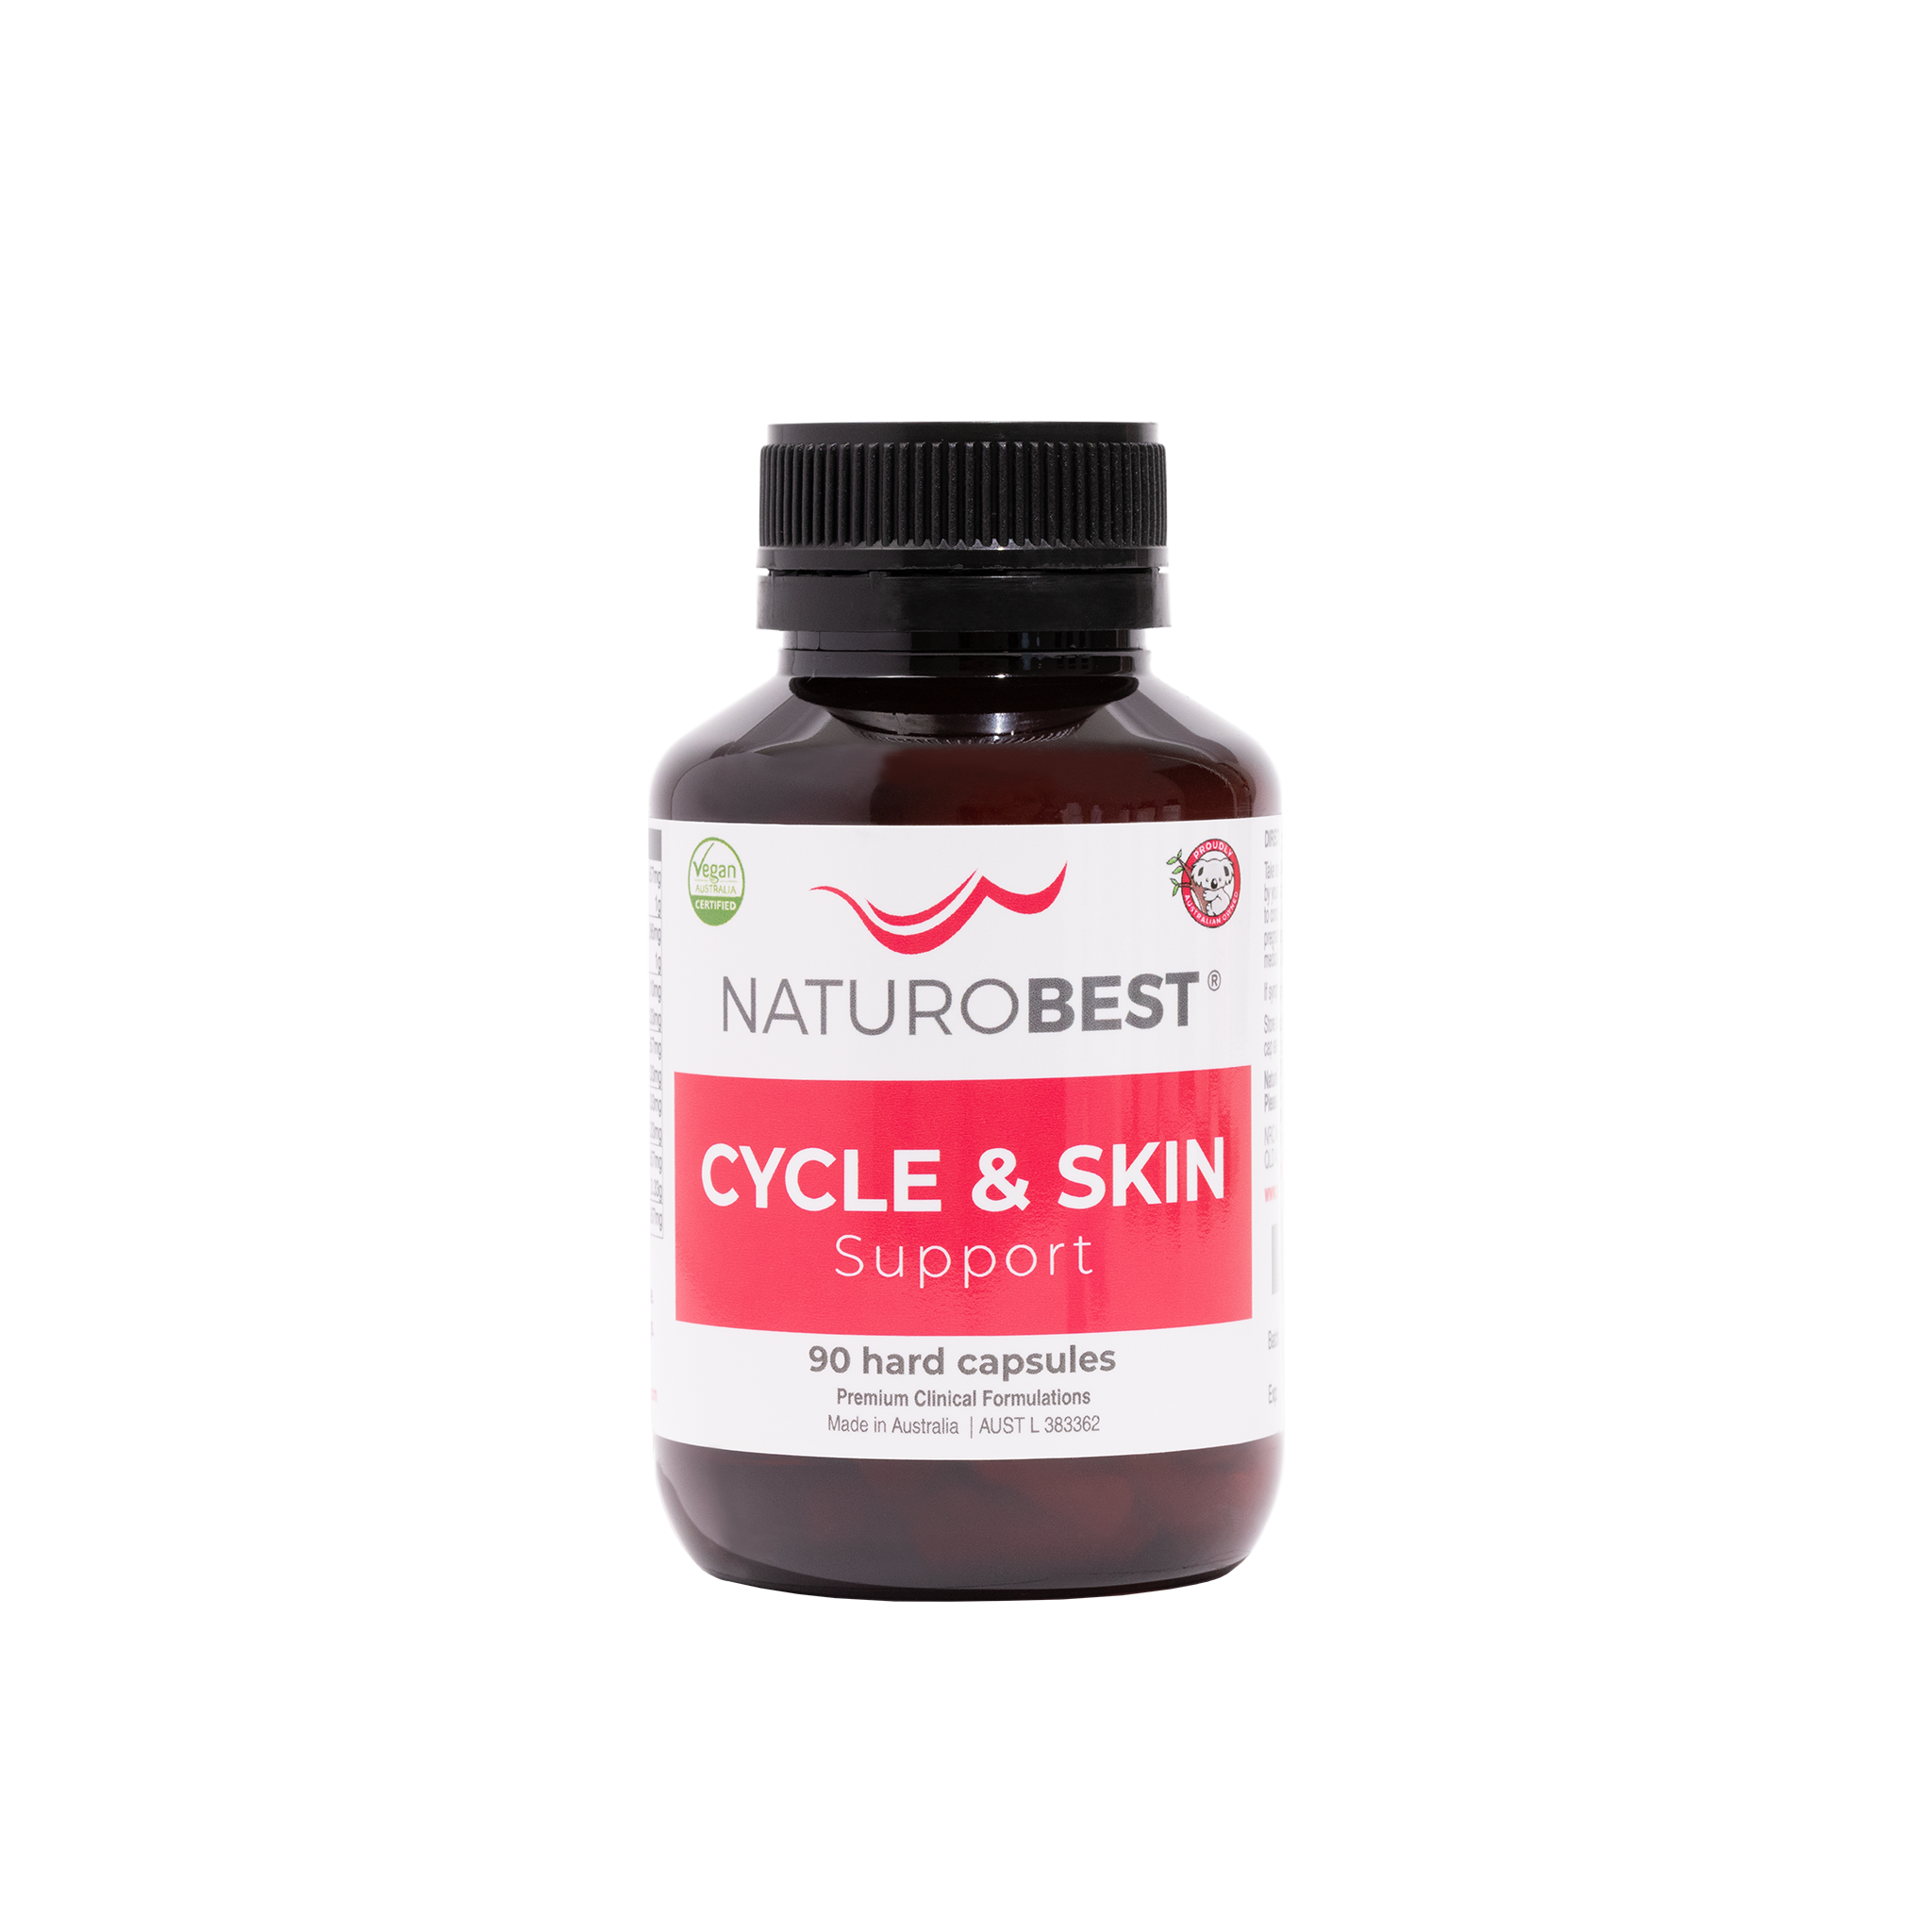 Cycle & Skin Support - Carton